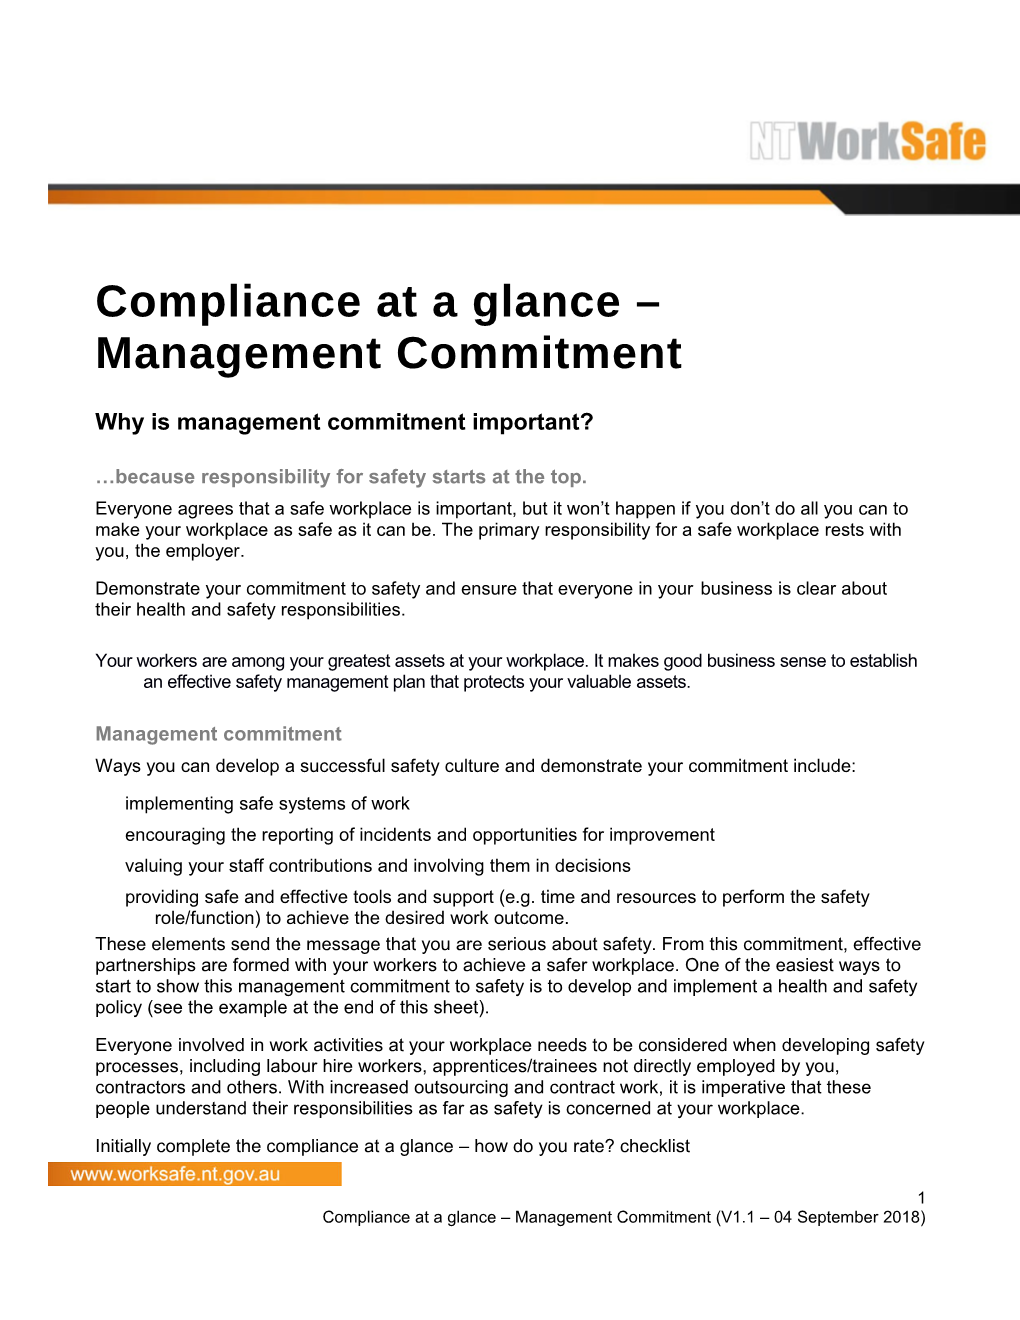 Compliance at a Glance Management Commitment